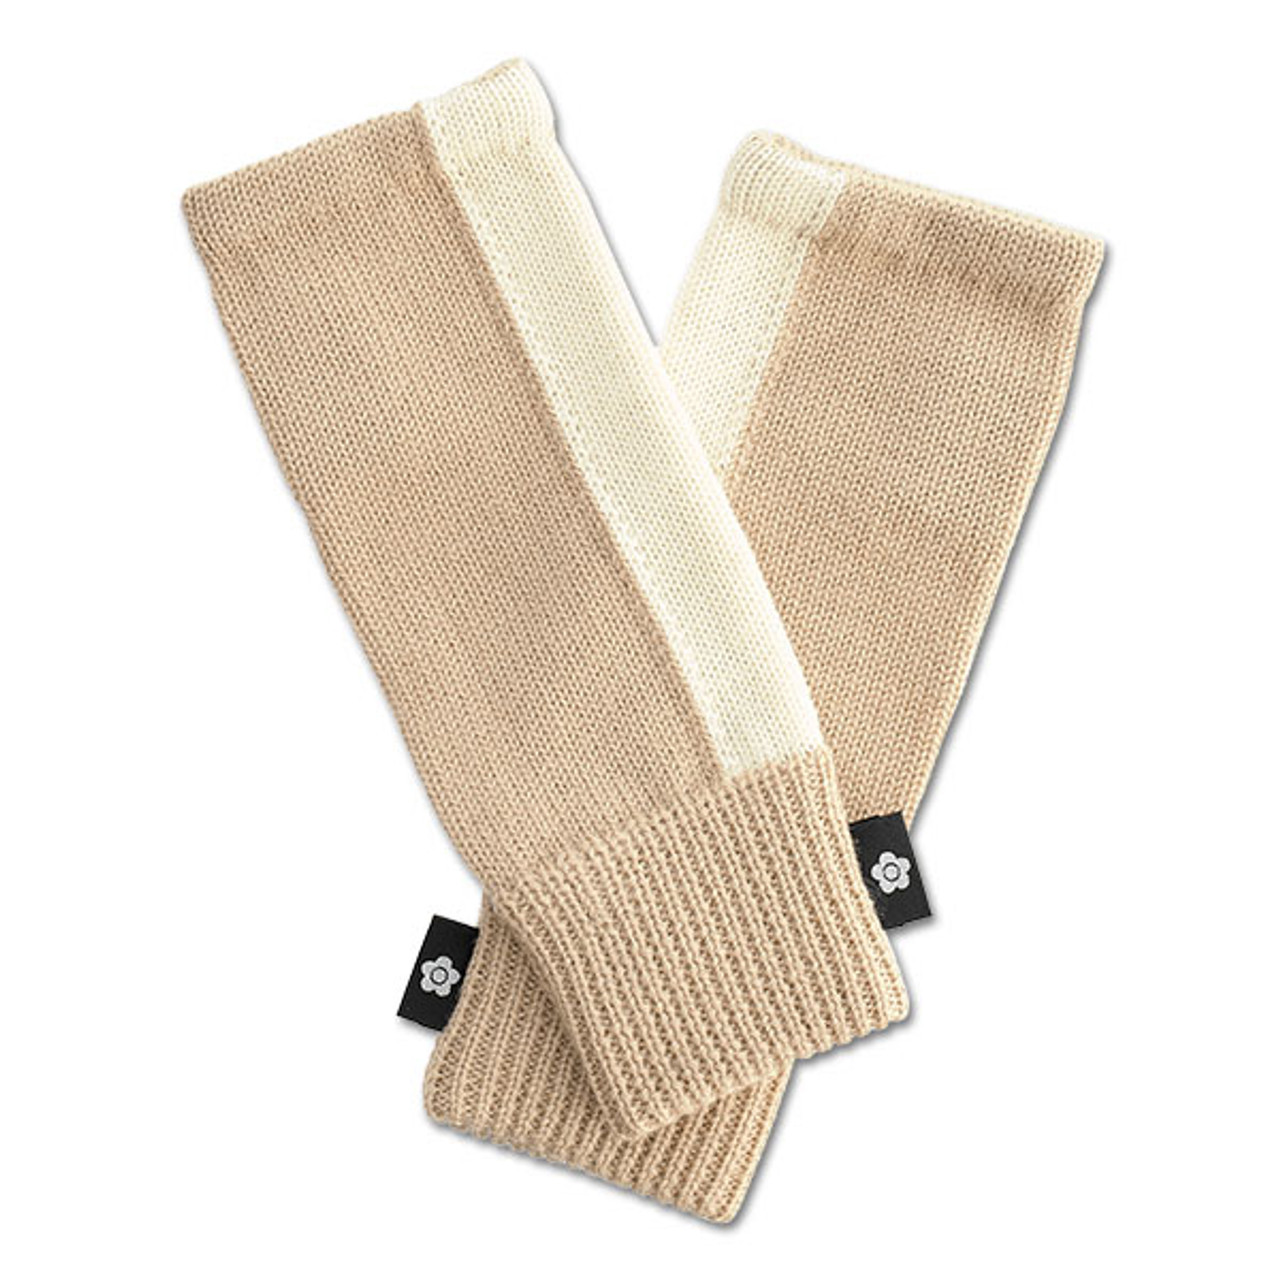 Bicolour Knitted Hand Warmers